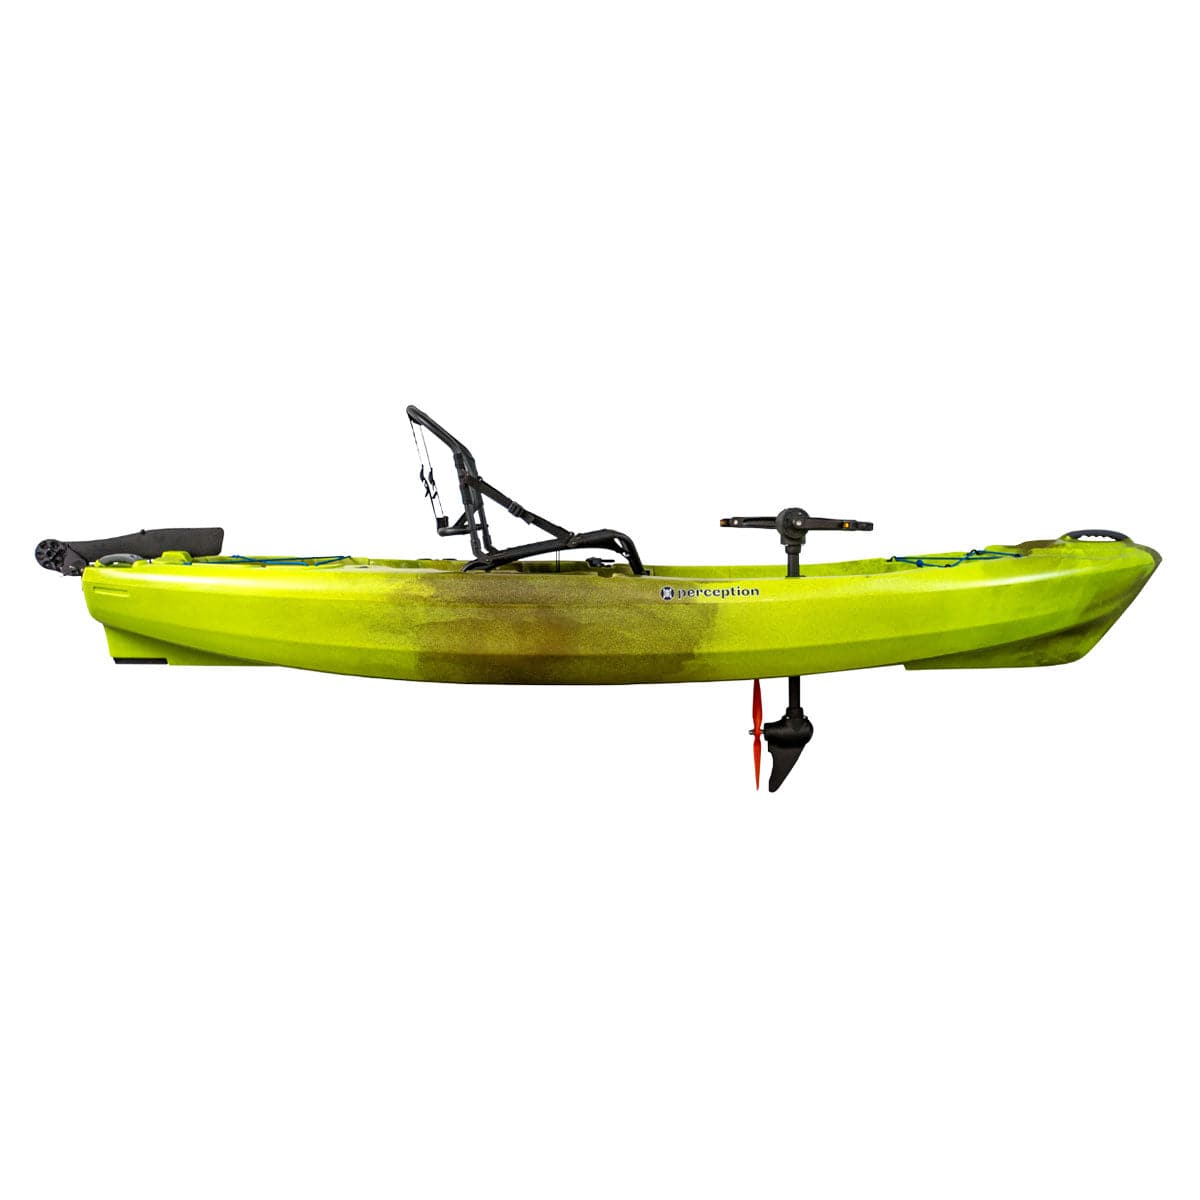 Featuring the Crank 10 fishing kayak, pedal drive kayak manufactured by Perception shown here from a fifth angle.